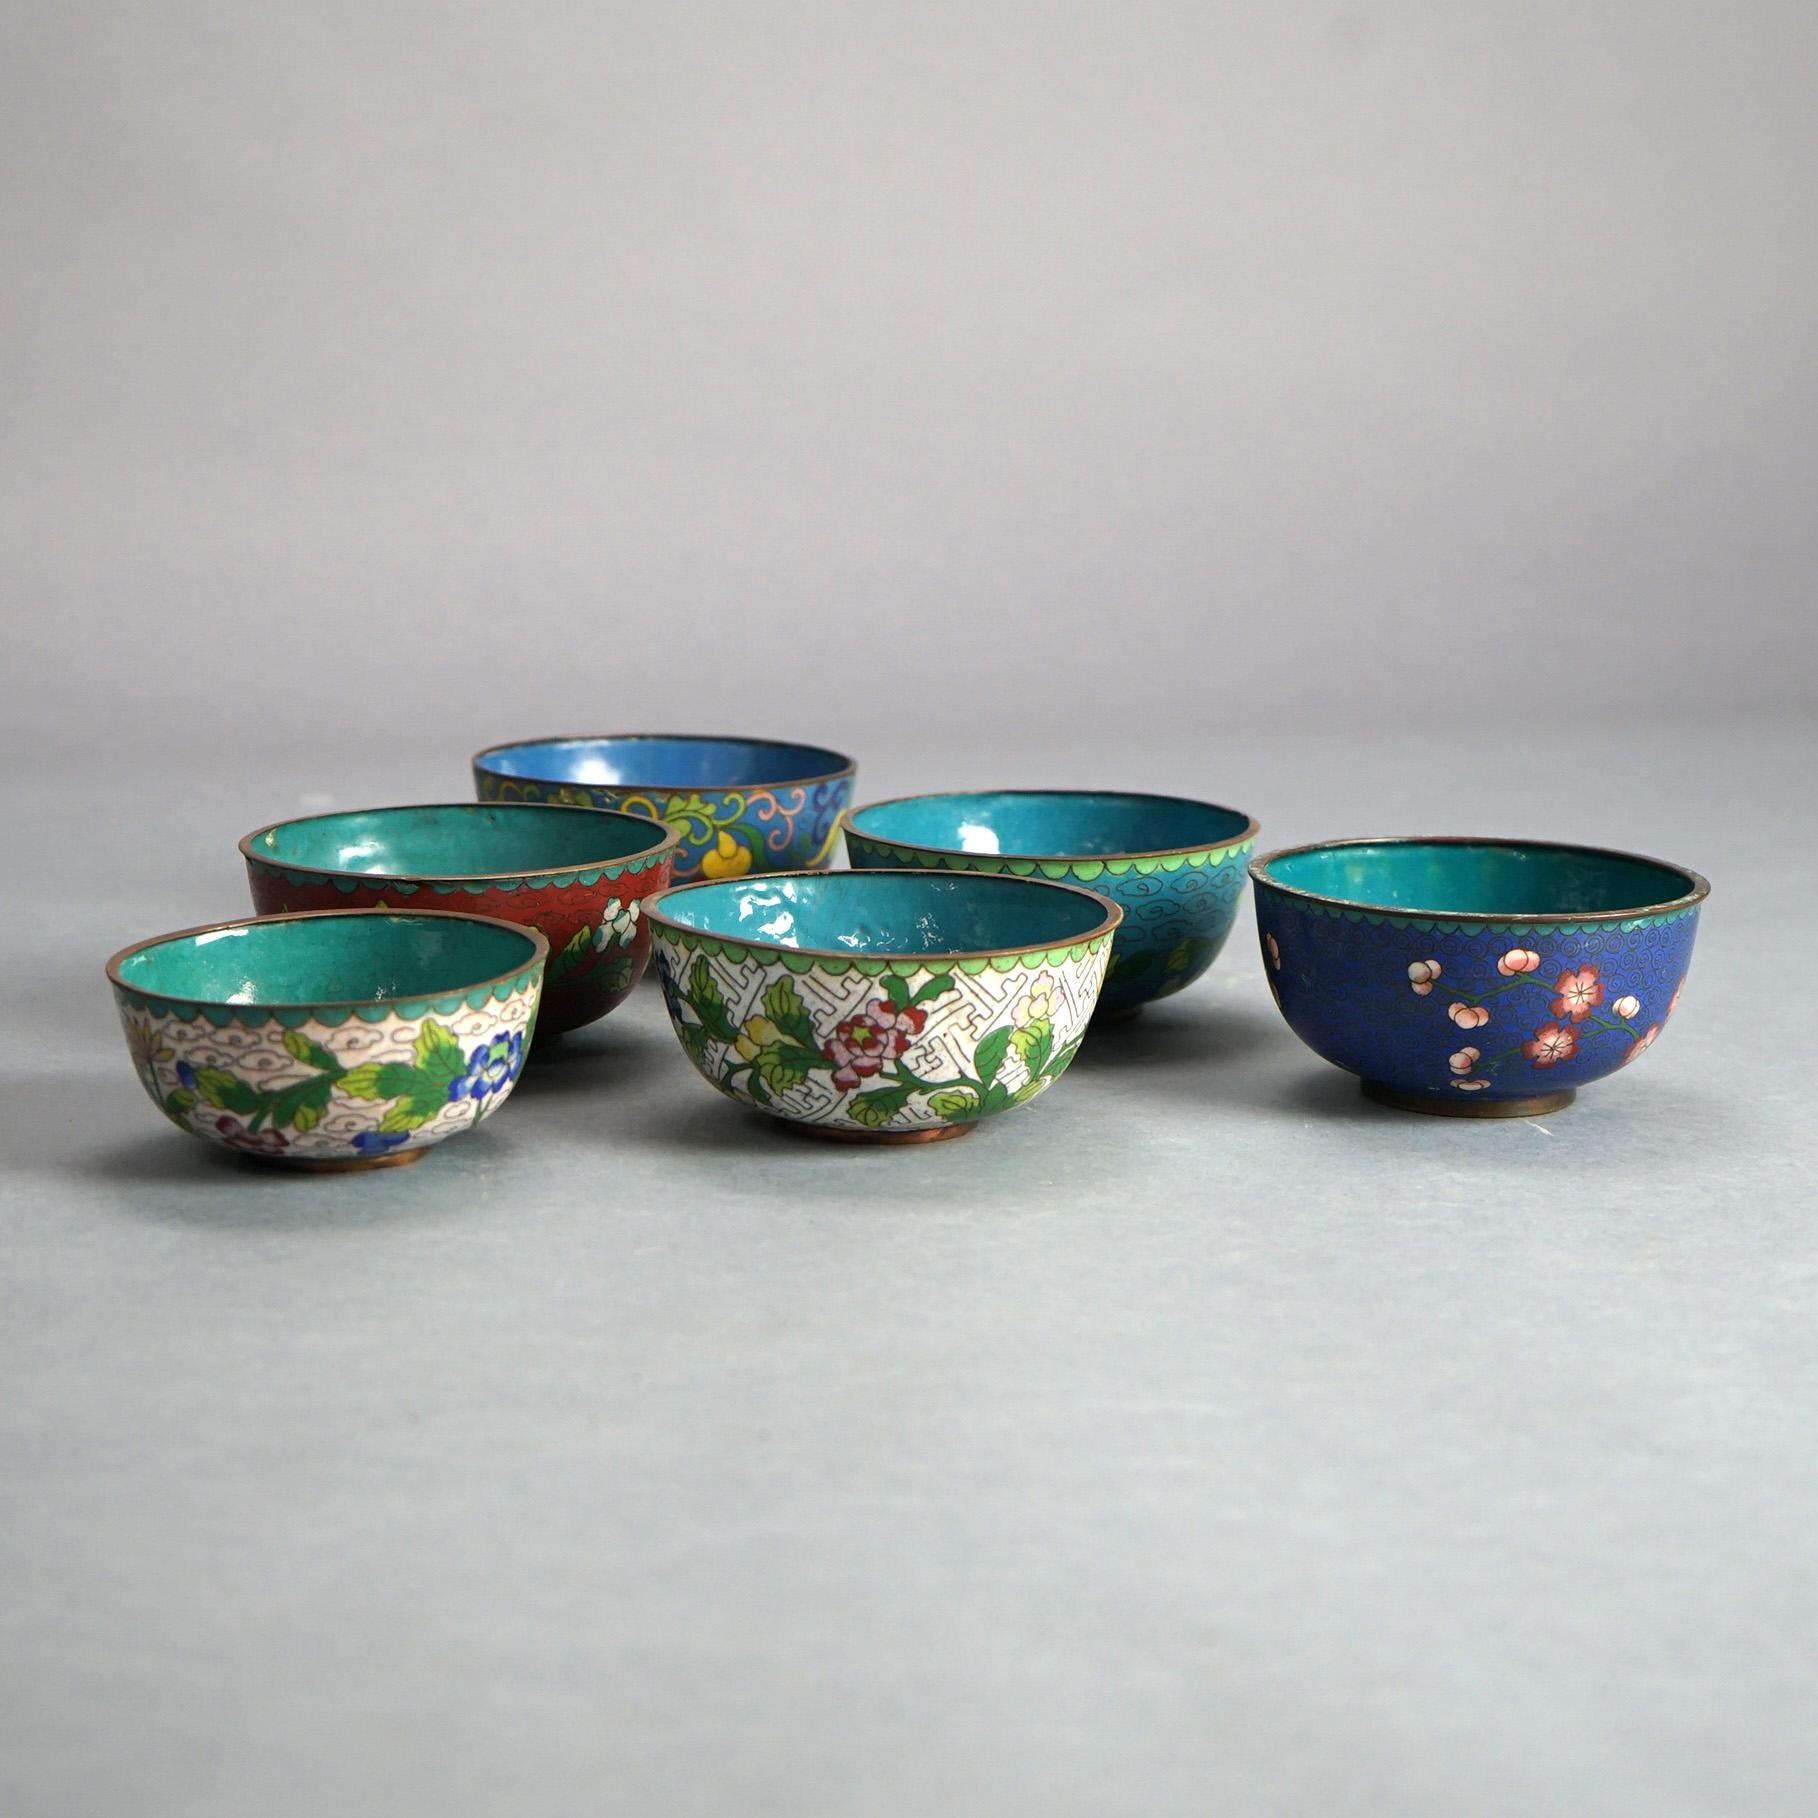 Six Antique Chinese Cloisonne Enameled Rice Bowls with Floral Design, C1920

Measures - 1 @ 4'' x 2''; 5 @ 2.5''H x 4.5'' 